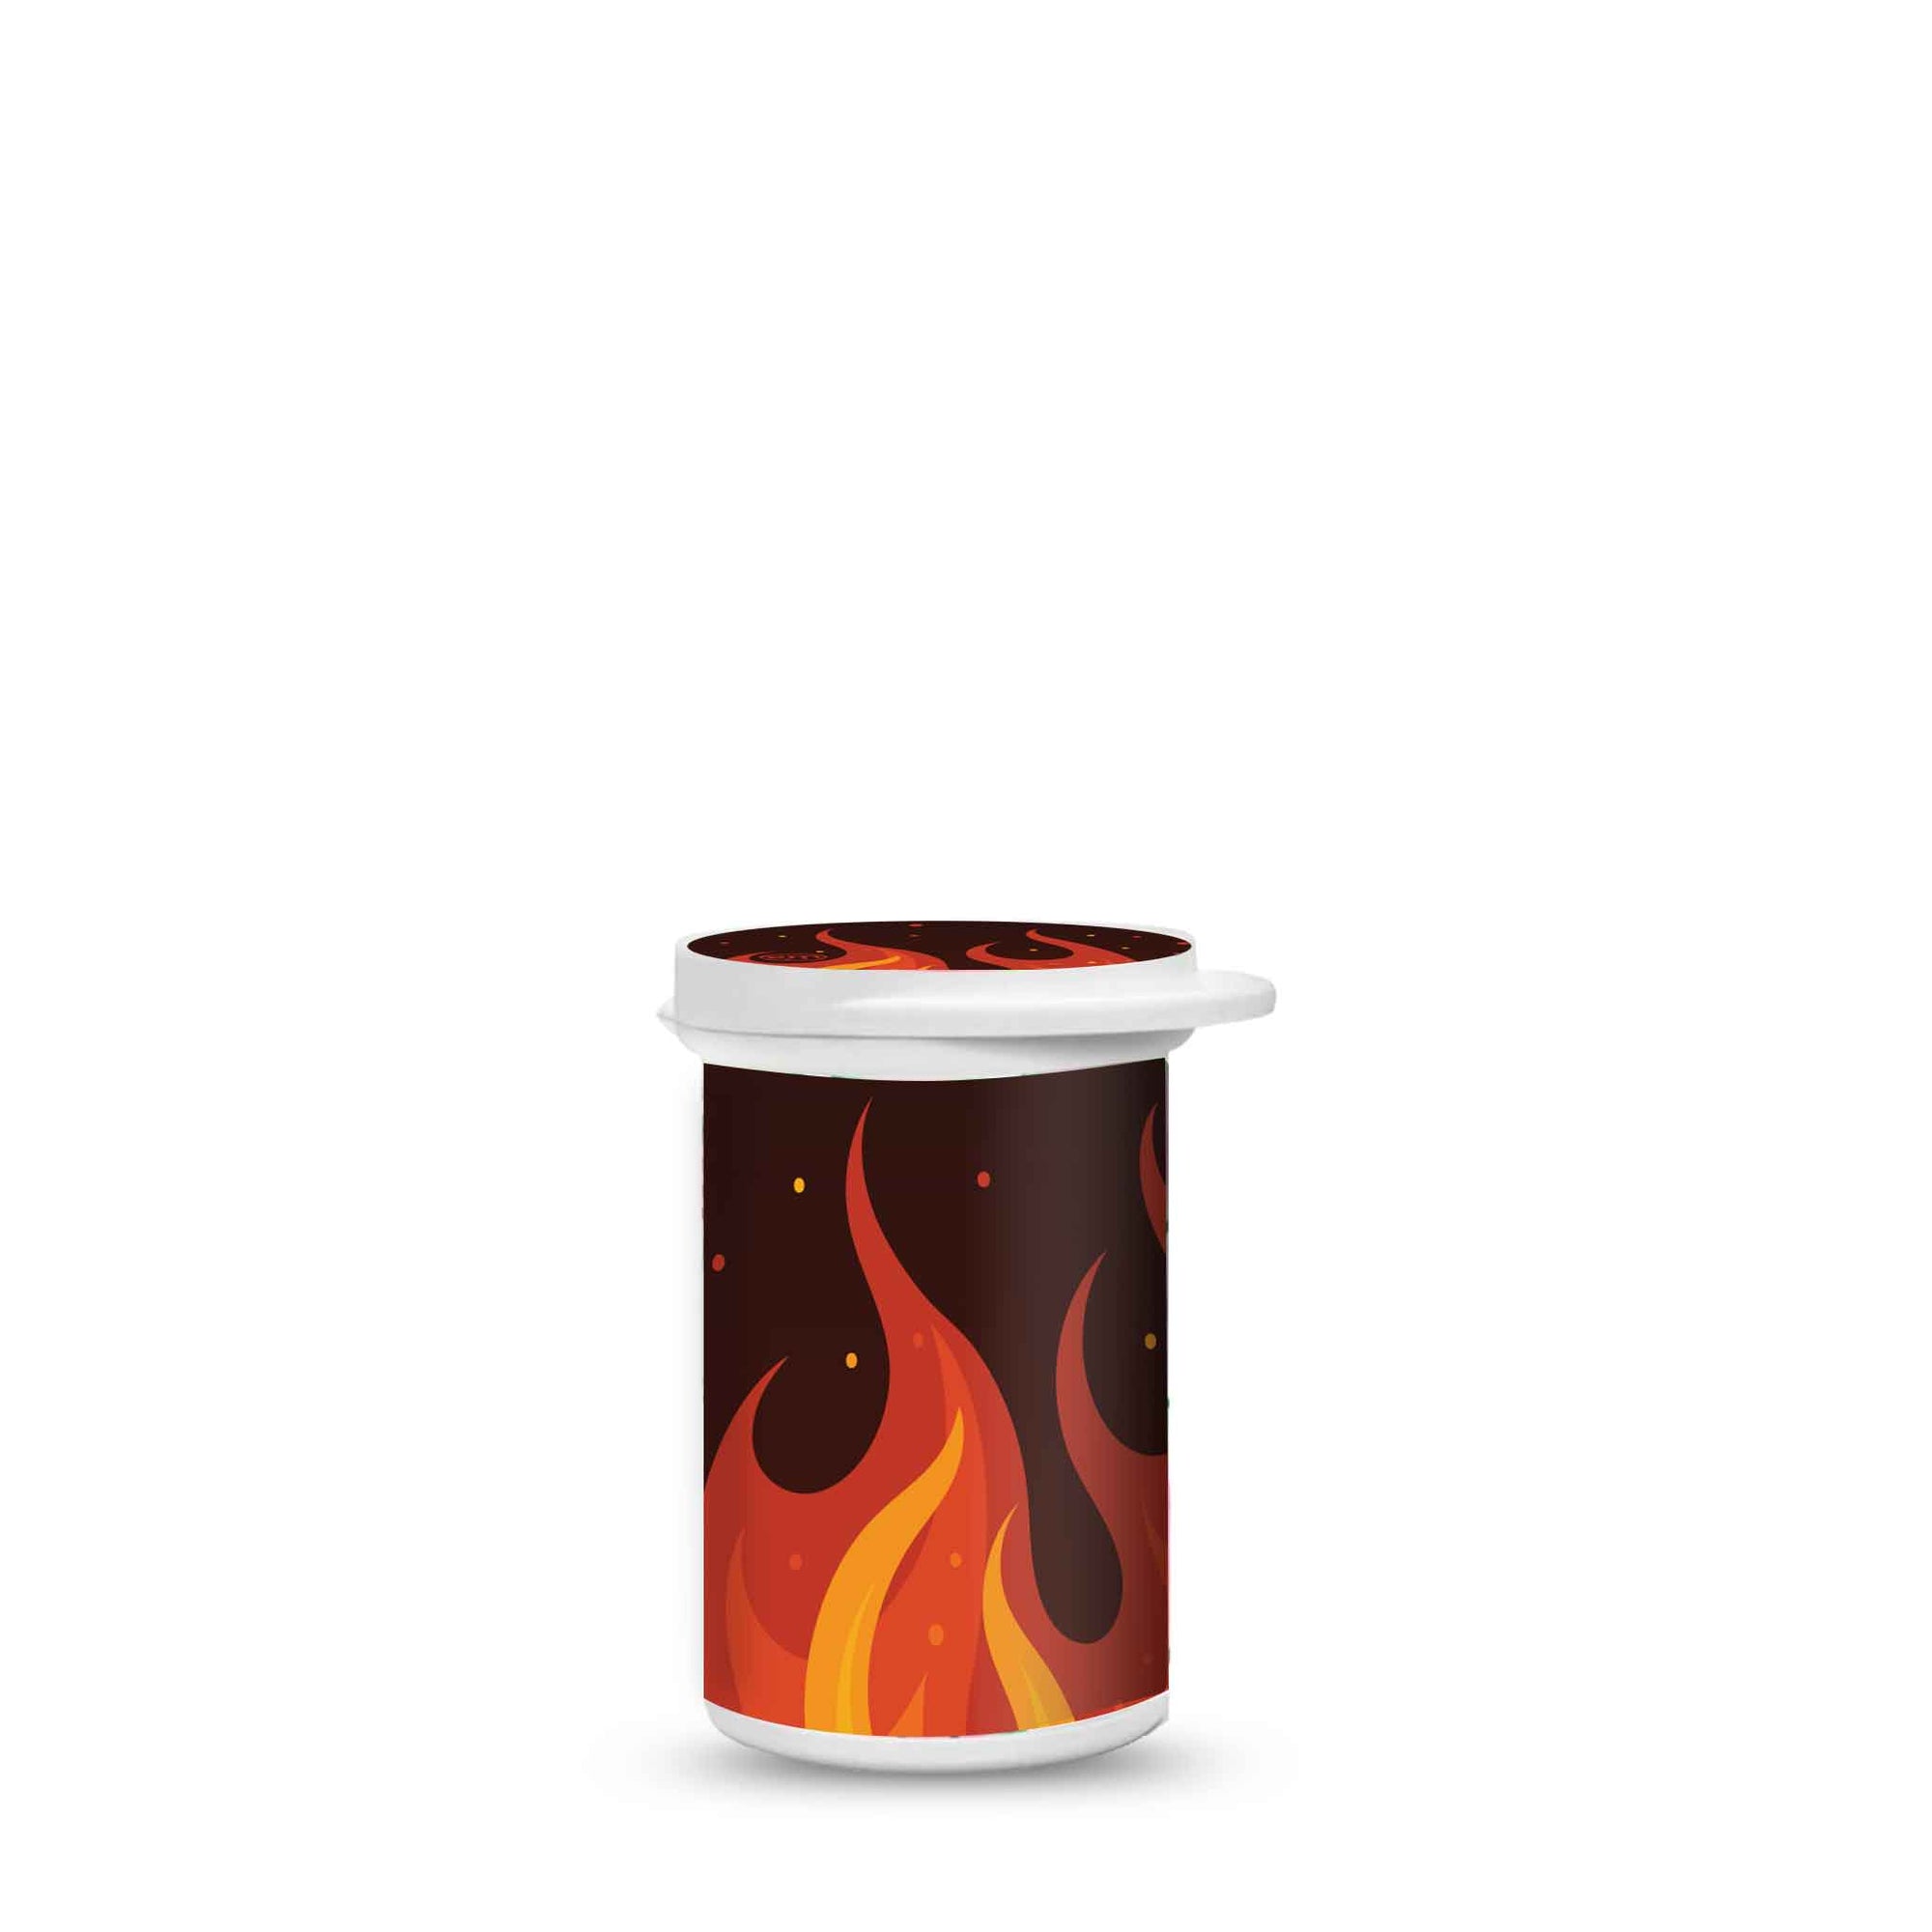 ExpressionMed Roarin' Flame Strips Pot Sticker